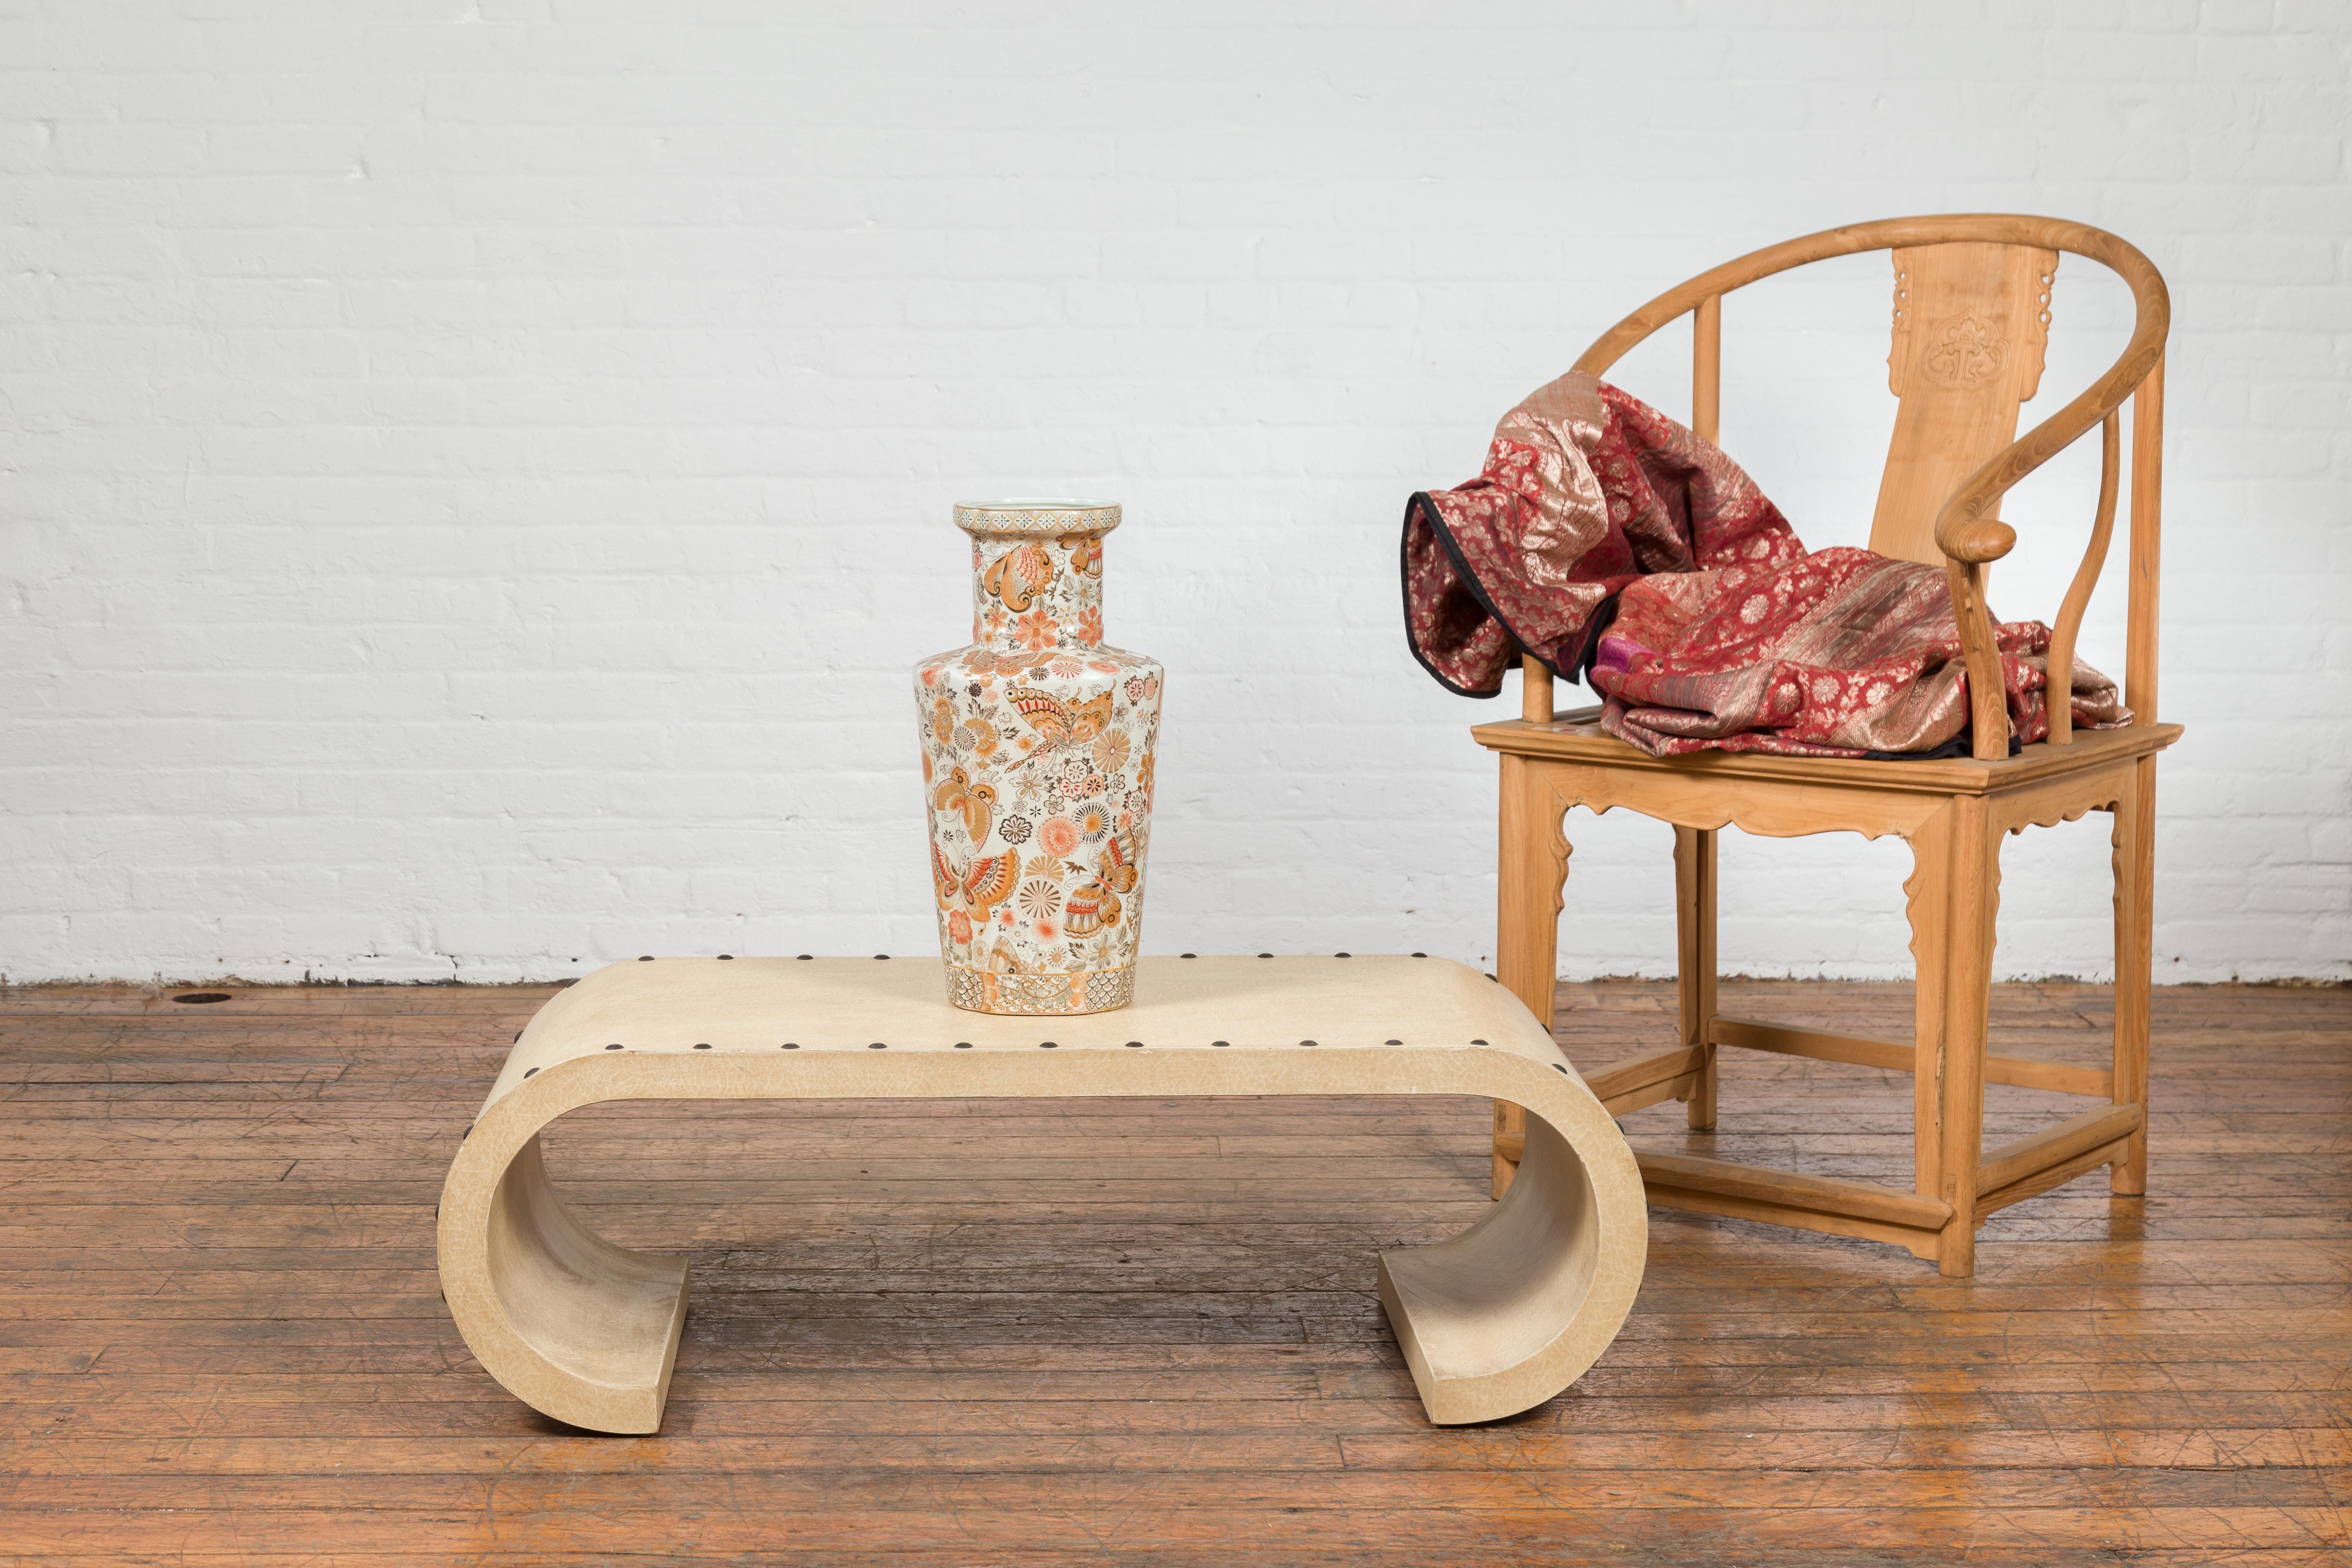 A contemporary Burmese scroll coffee table from the 21st century, with underglaze beige snakeskin patina and round nailheads. Created in Burma, this contemporary coffee table charms us with its scrolling design and beige snakeskin appearance.